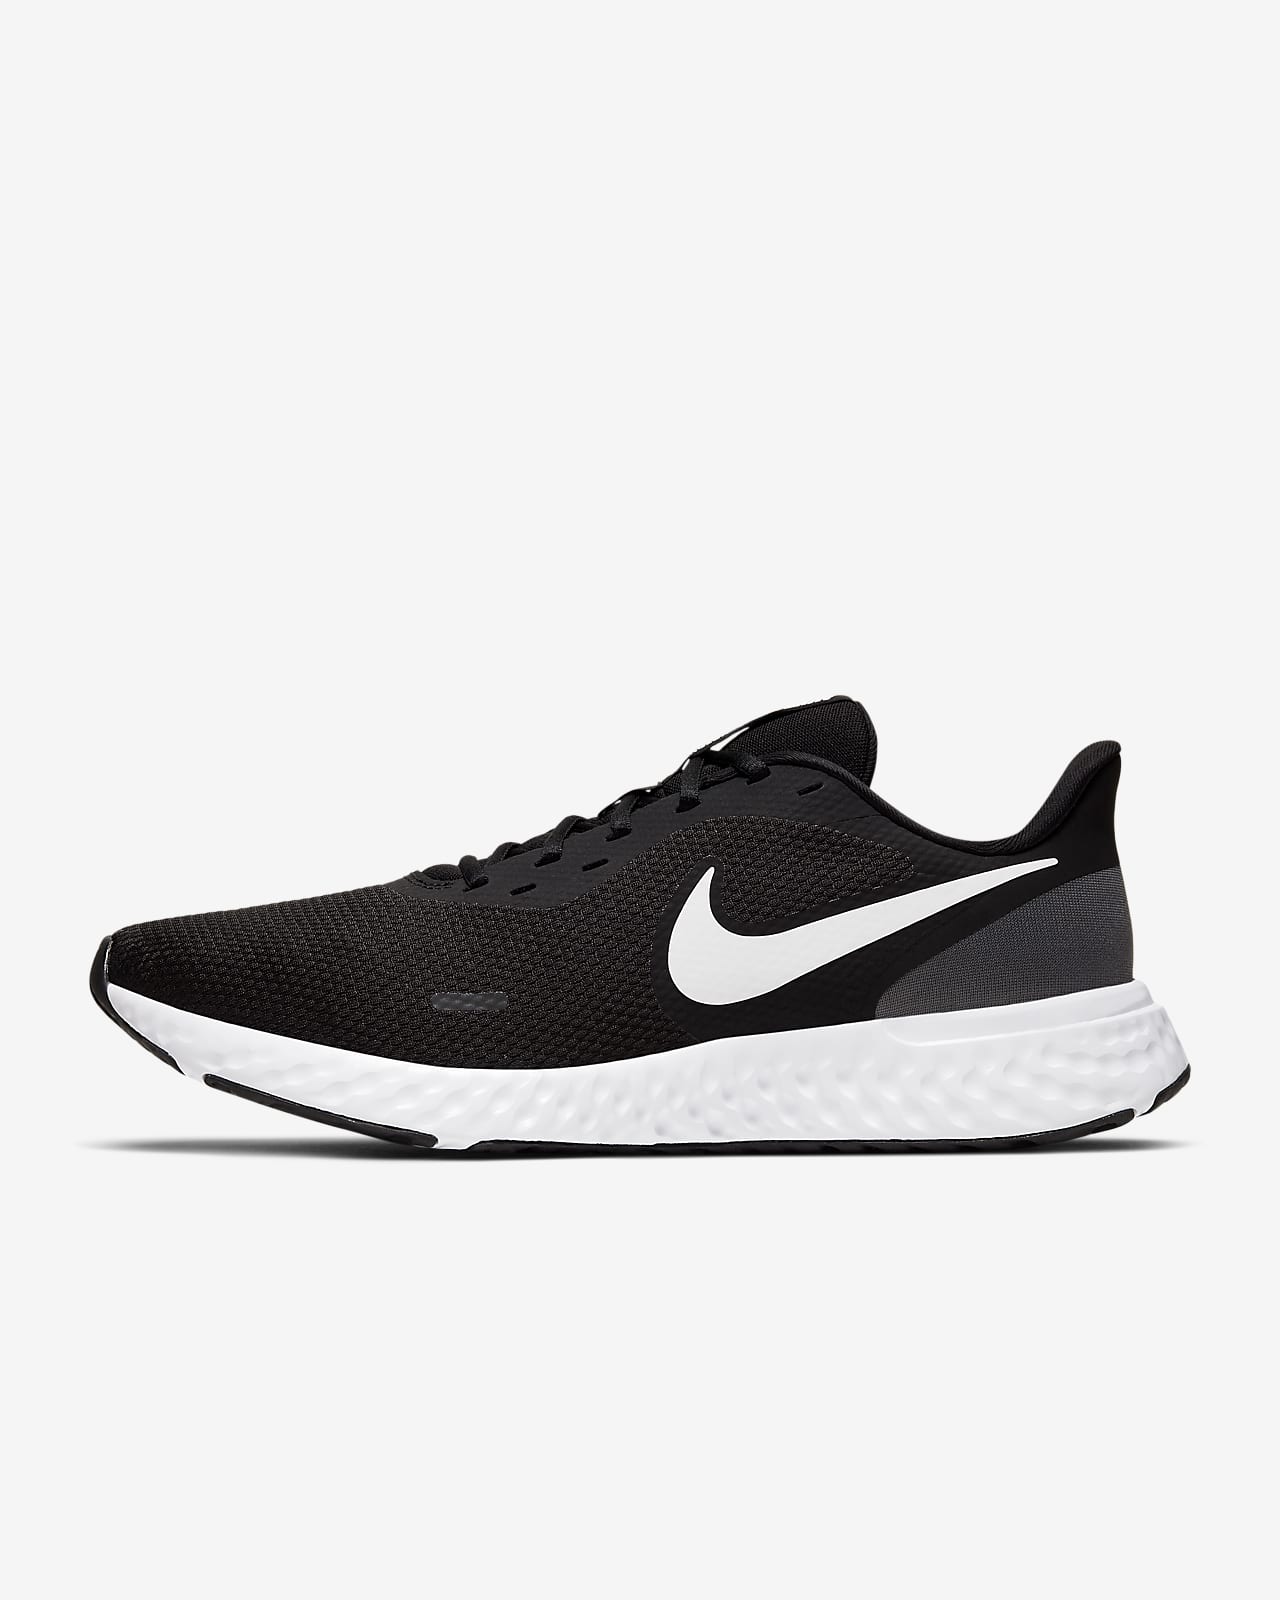 revolution-5-mens-running-shoes-ZXqS6C.png